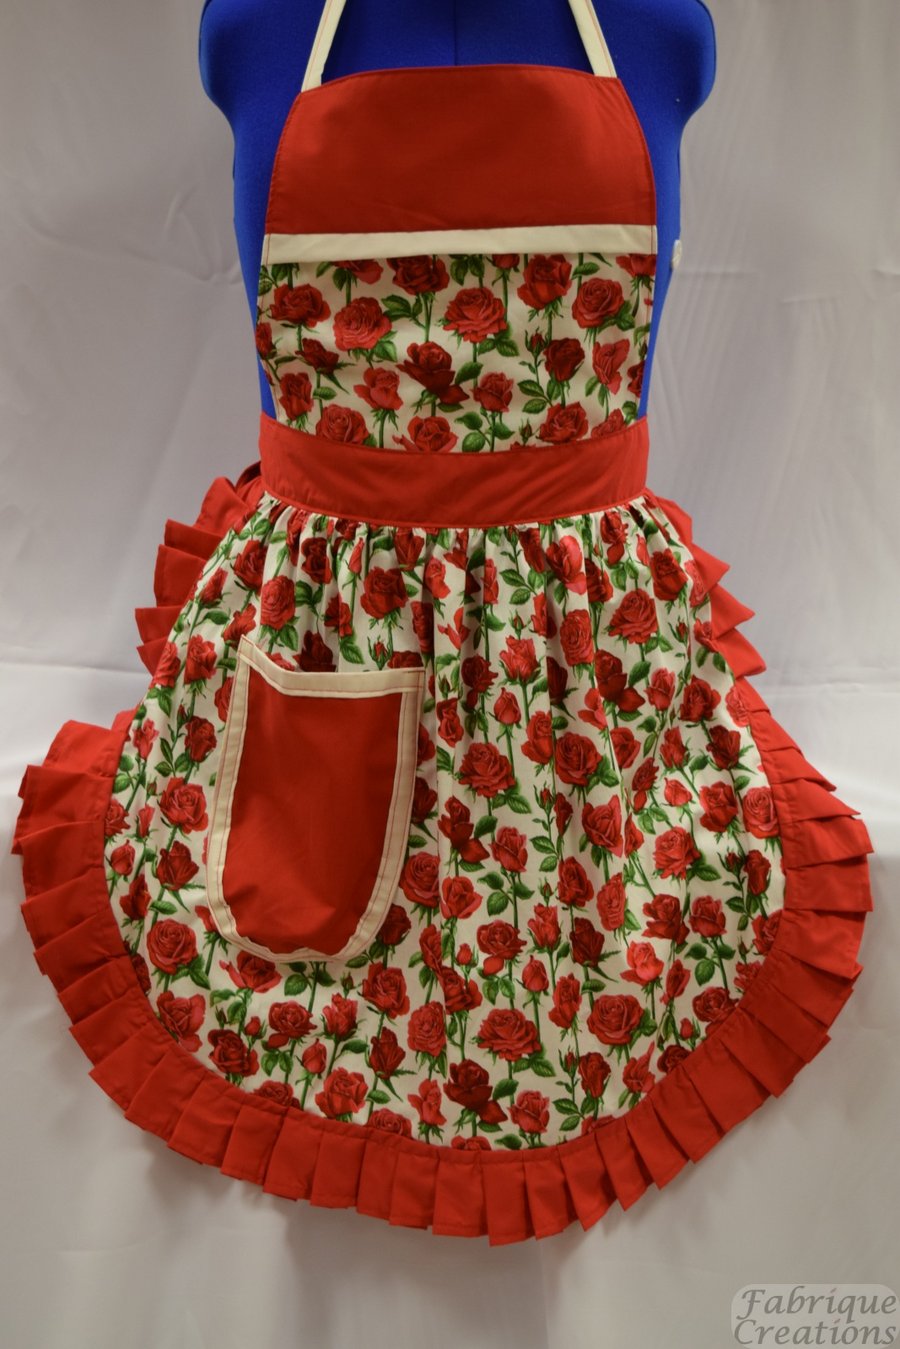 50s Style Full Apron - Nutex - Red Roses (Stems) on Cream with Red Trim